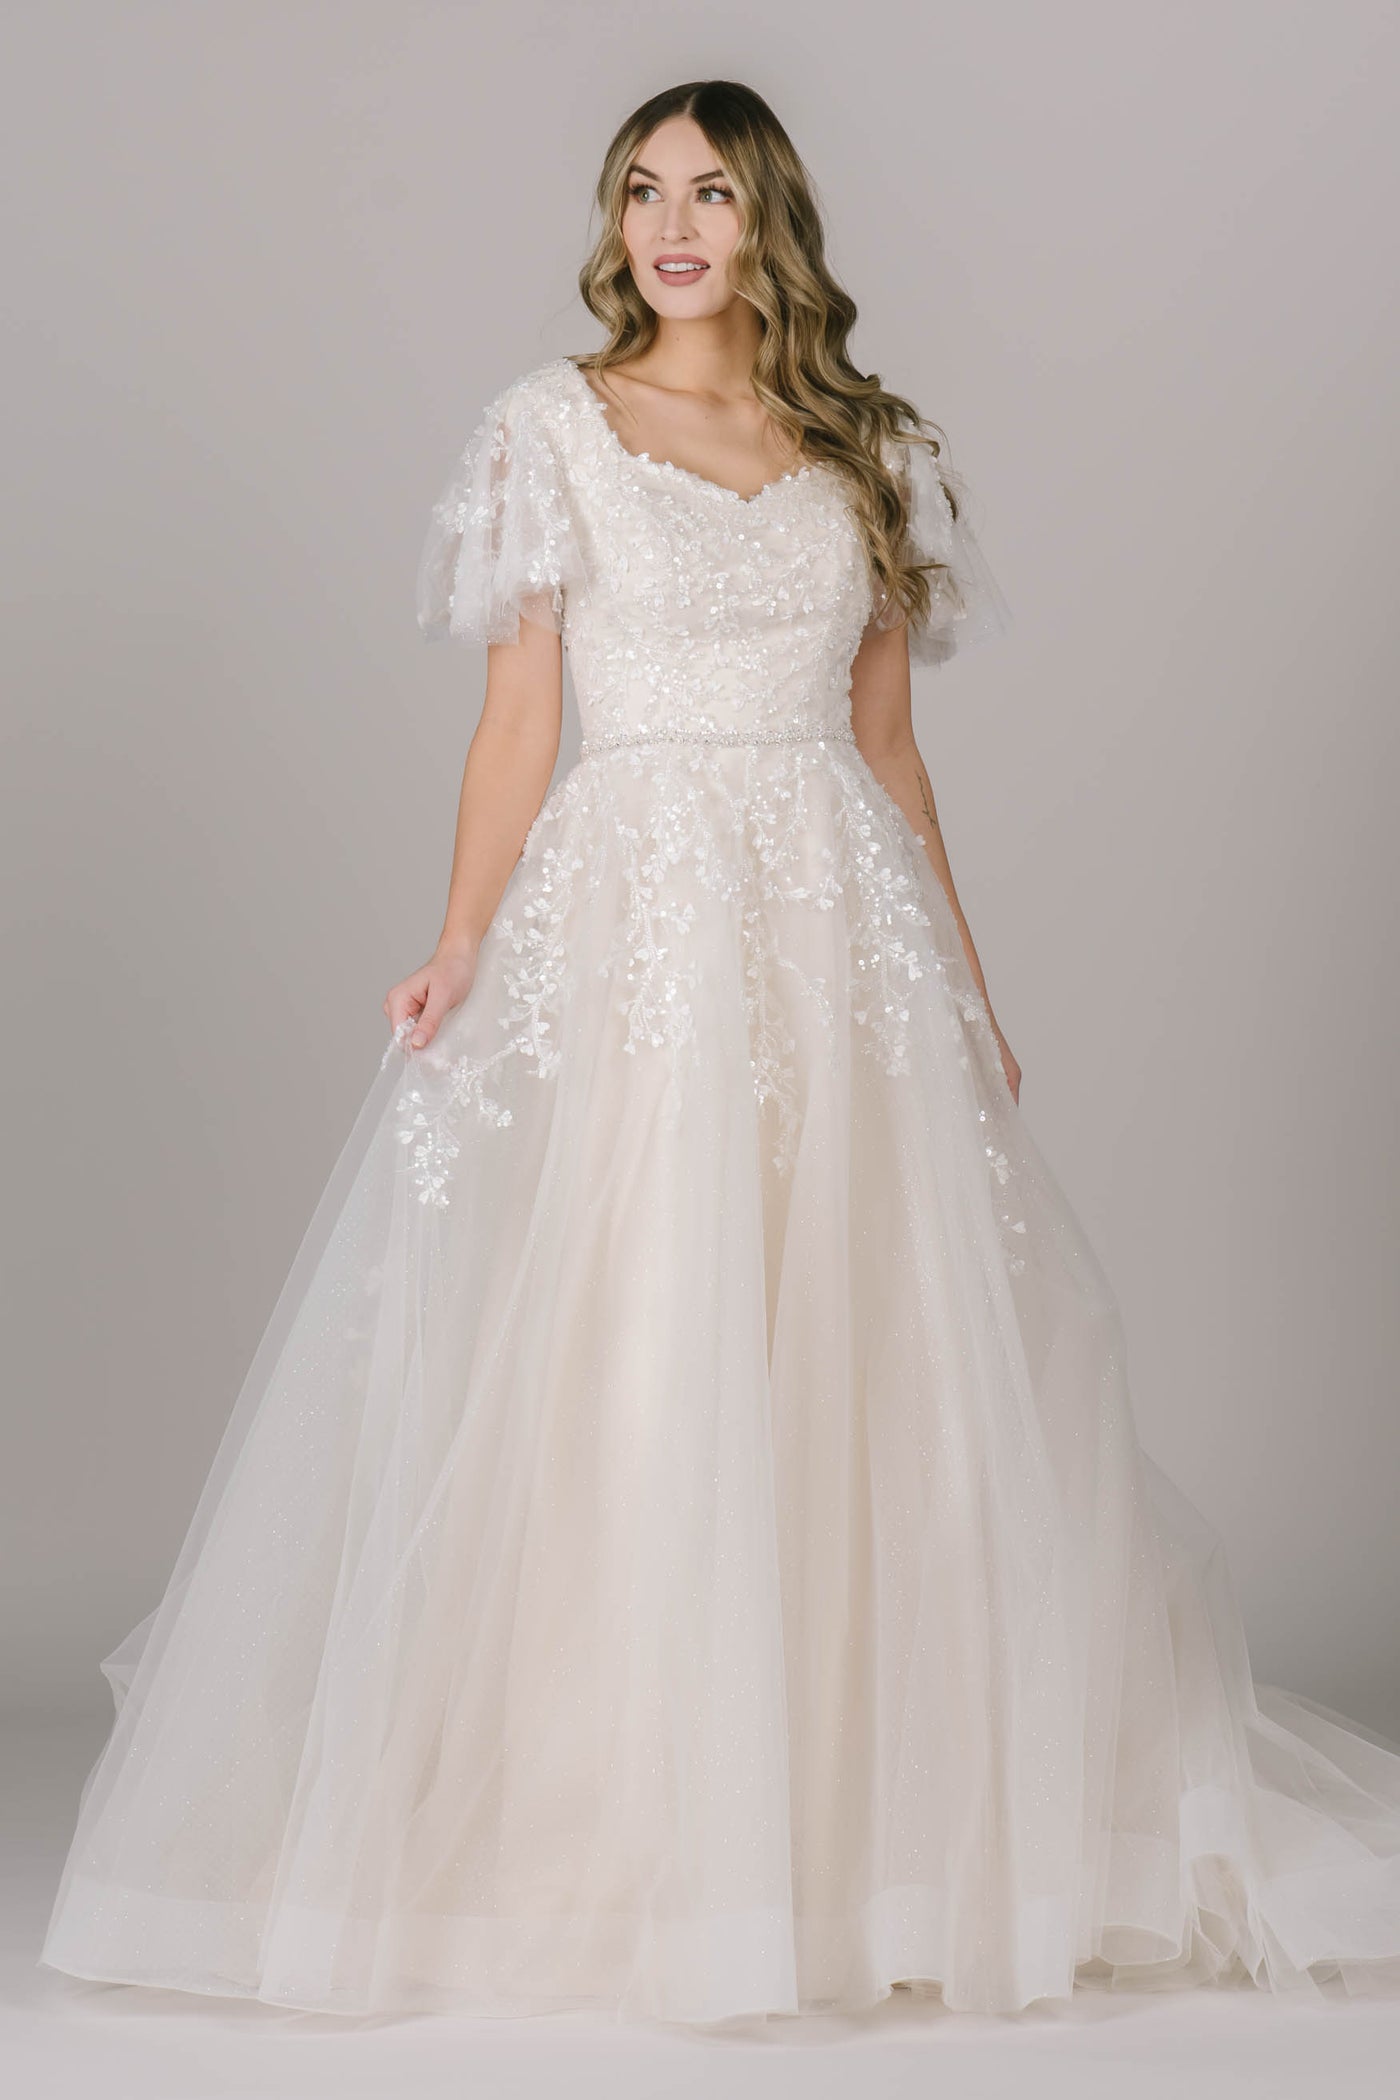 This is one of our favorite new modest wedding dresses! It has a stunning lace all throughout the dress, a square v-neckline, and gorgeous flutter sleeves.